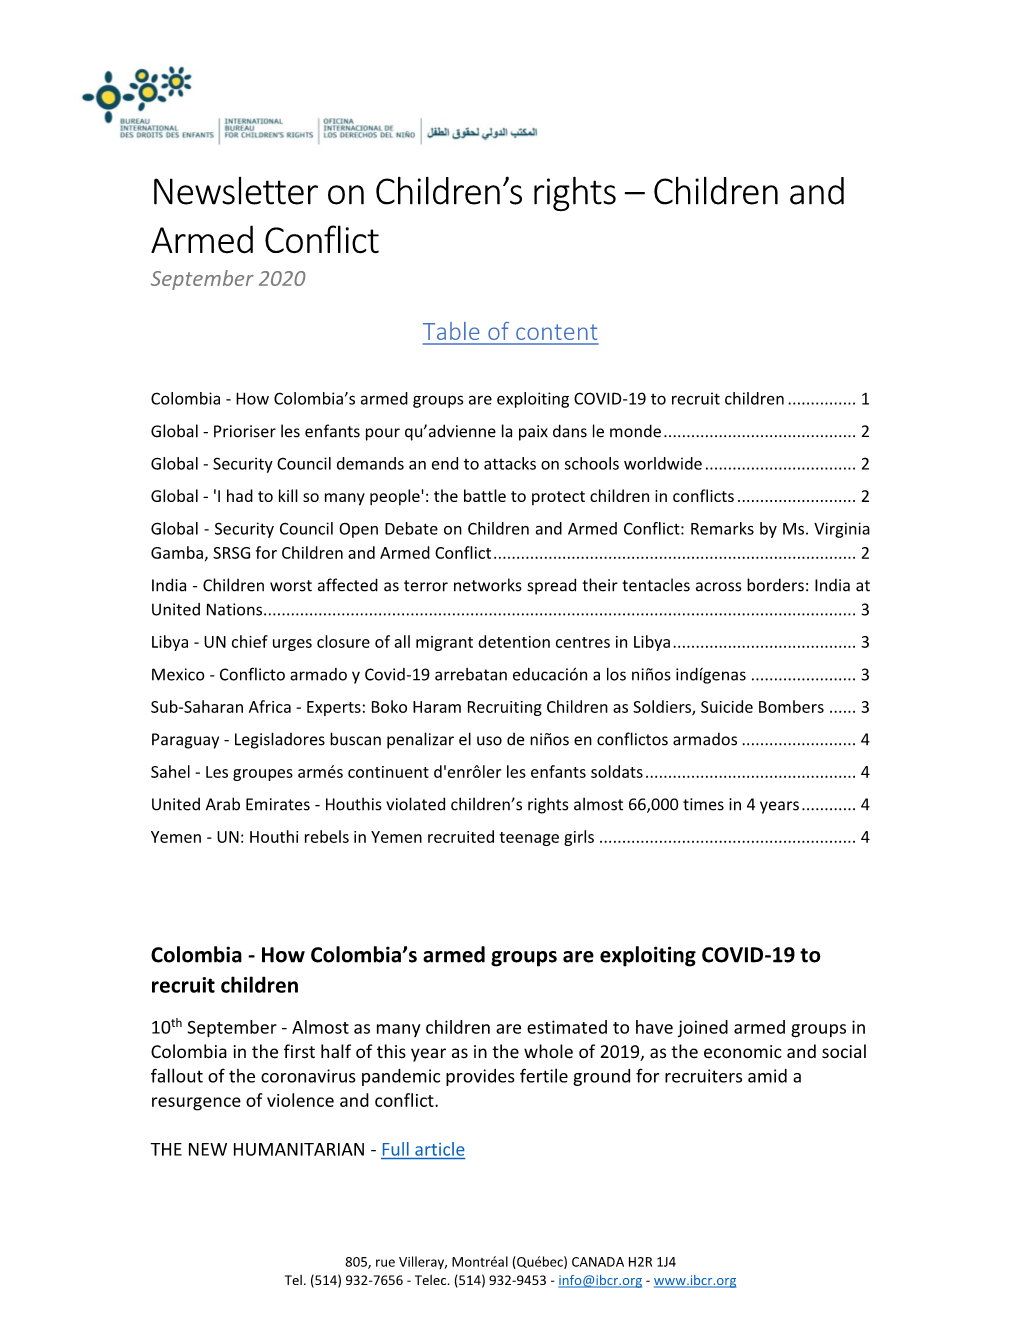 Children and Armed Conflict September 2020